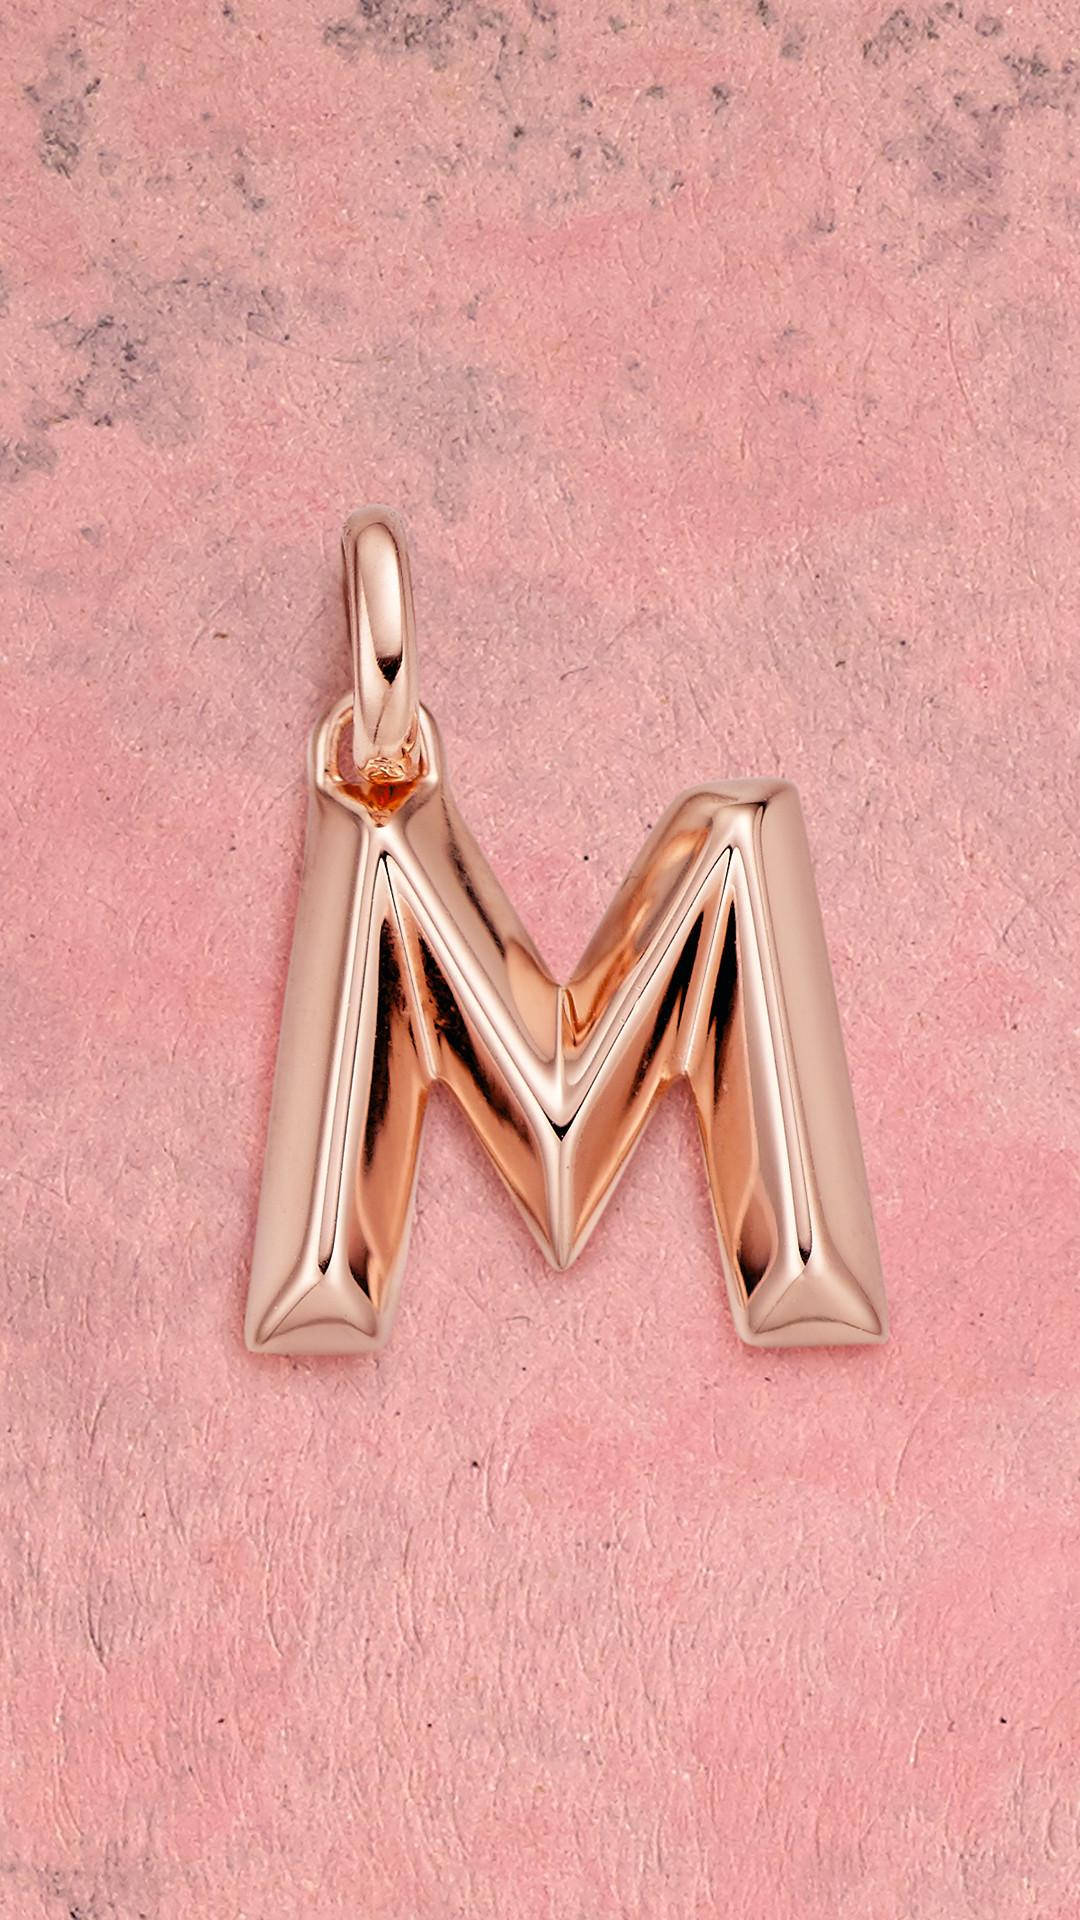 Gold-Plated Letter M Wallpaper